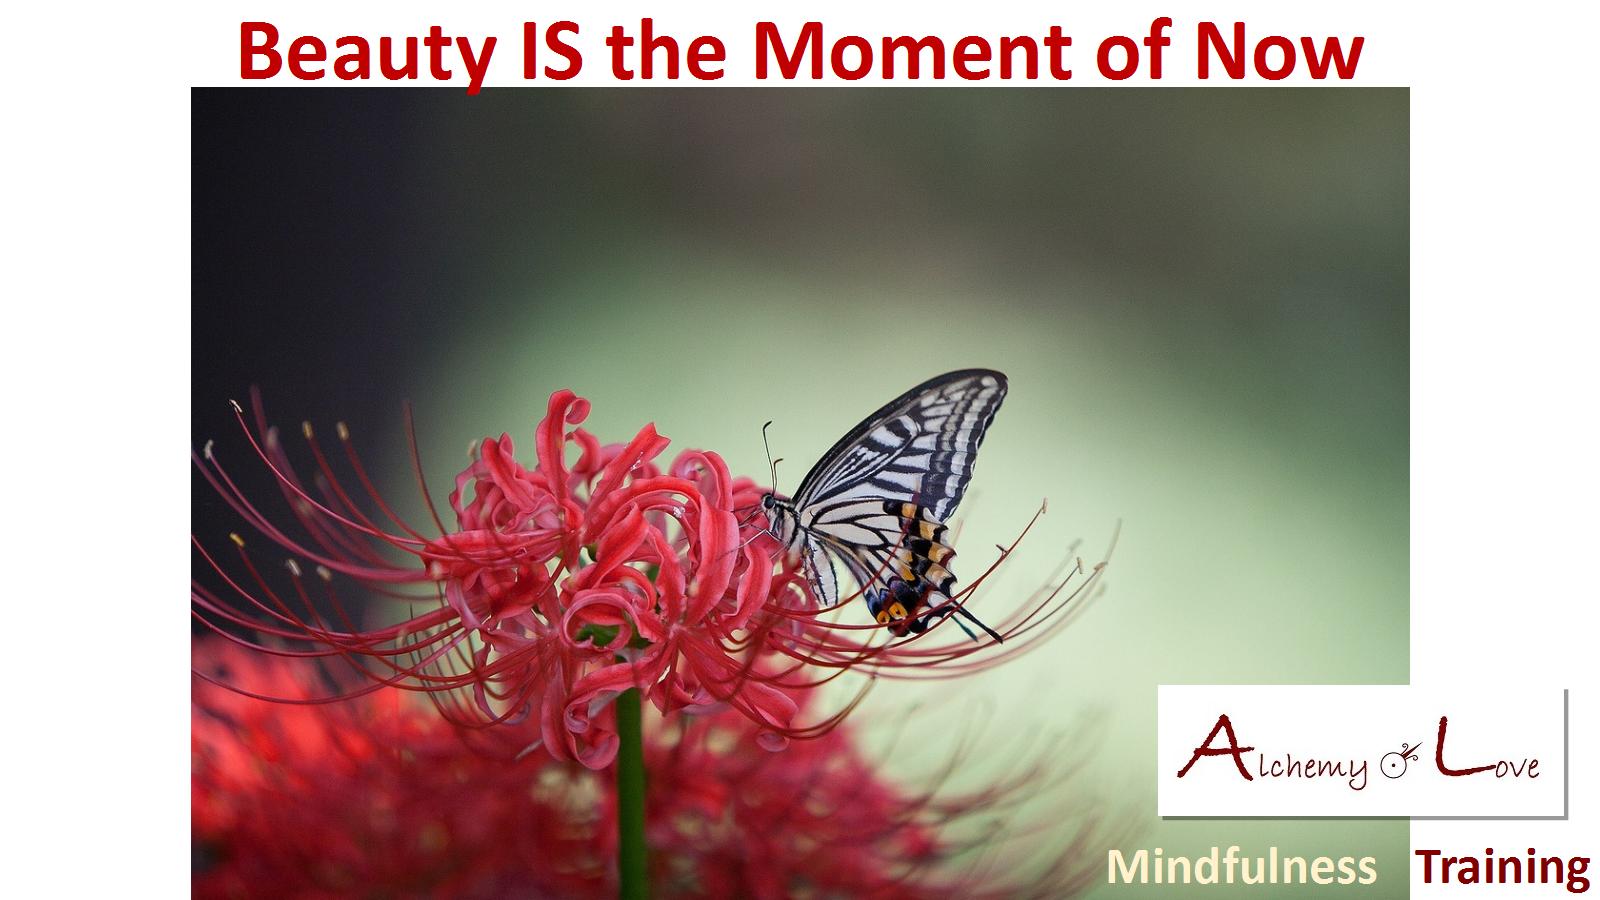 Beauty is the moment of now